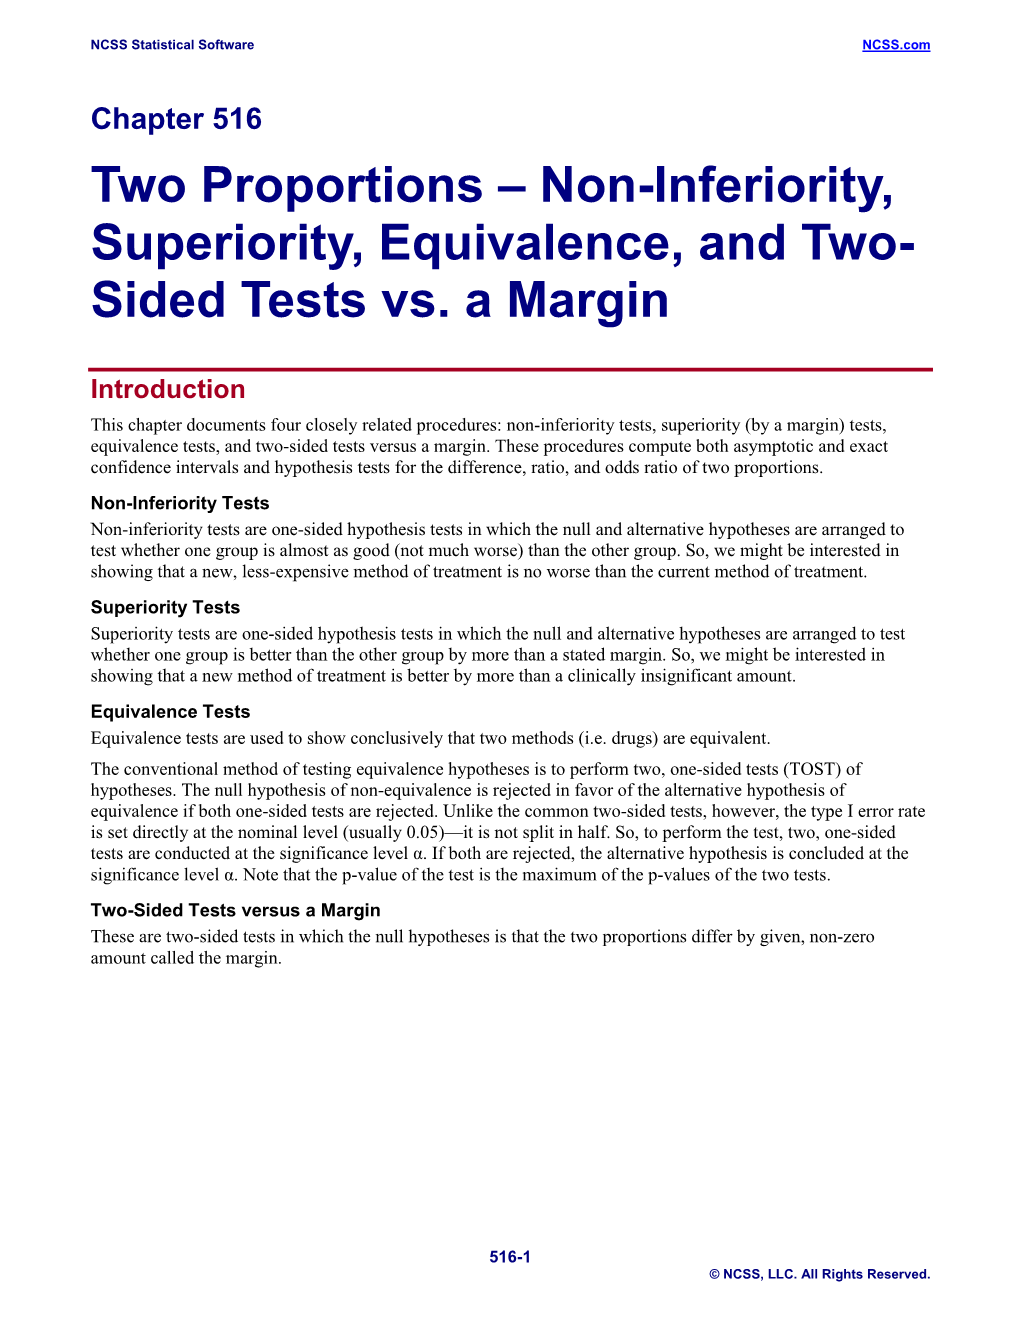 Non-Inferiority, Superiority, Equivalence, and Two-Sided Tests Vs